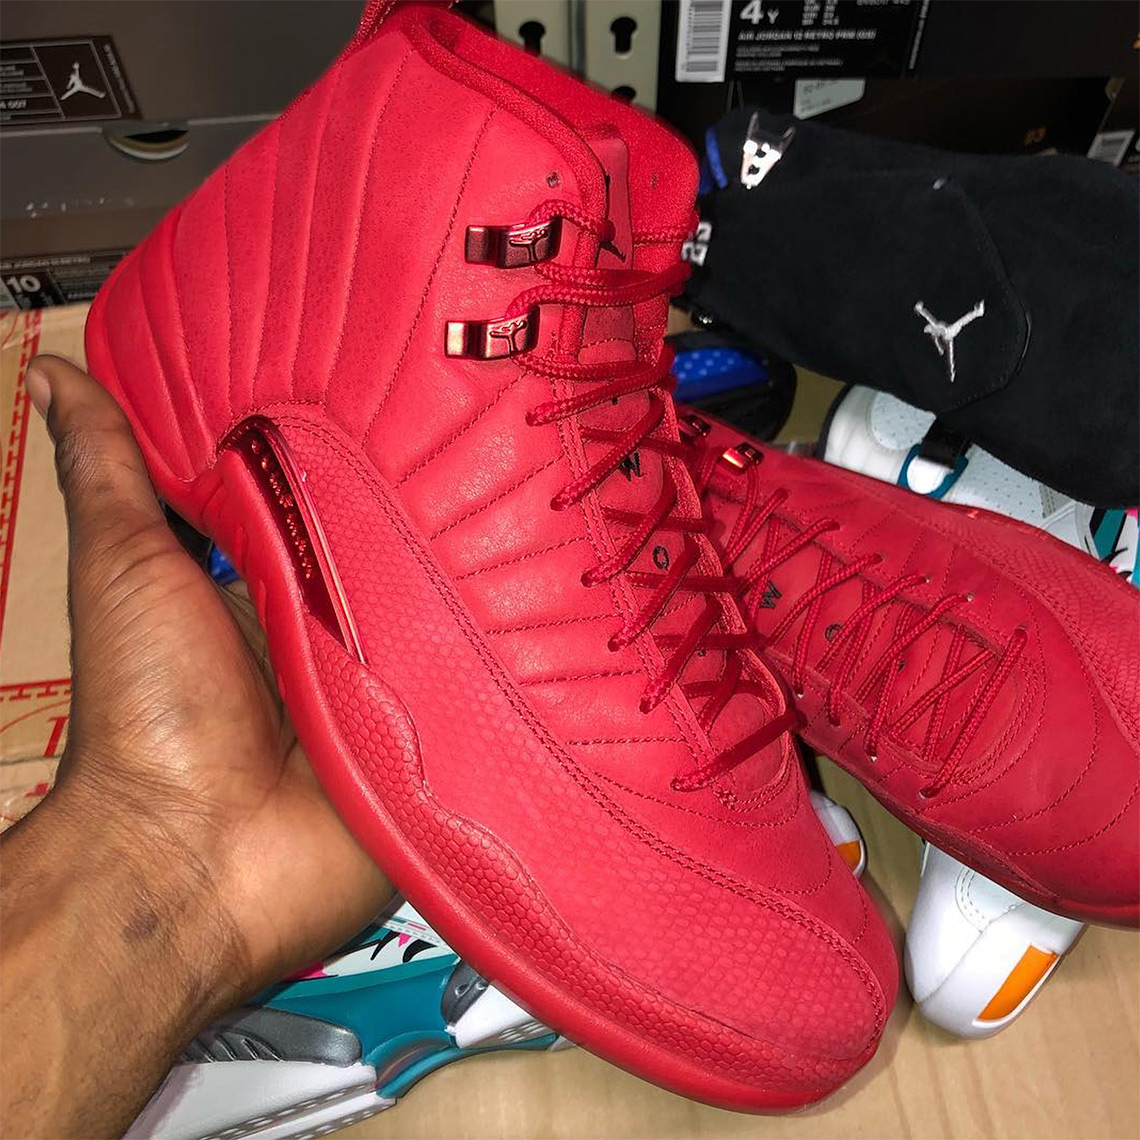 List 99+ Pictures Images Of Jordan 12s Updated